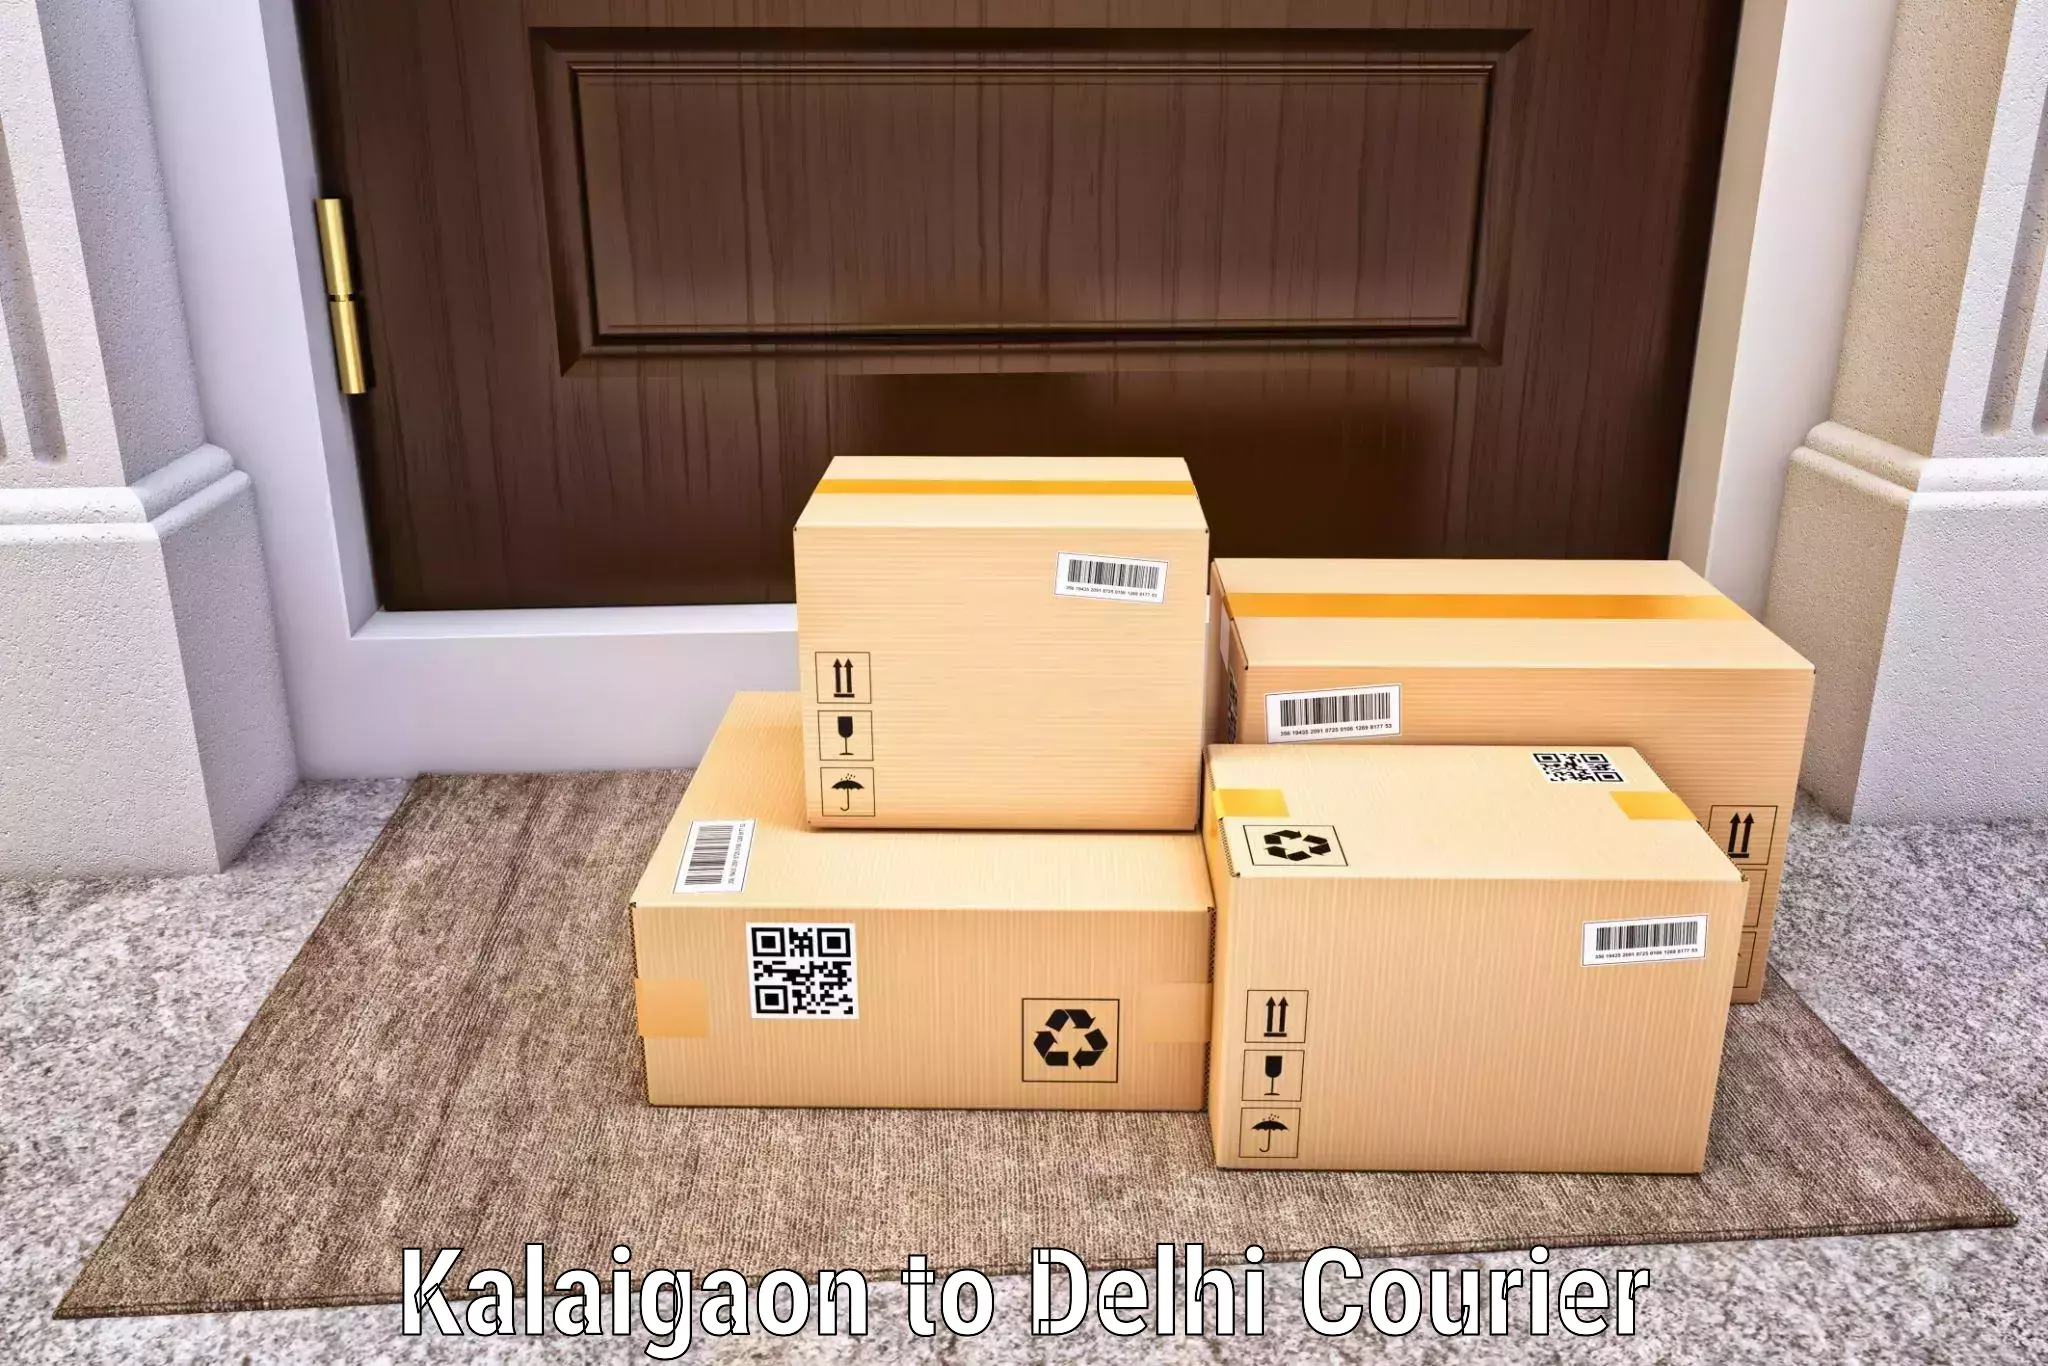 Same-day delivery solutions Kalaigaon to Delhi Technological University DTU